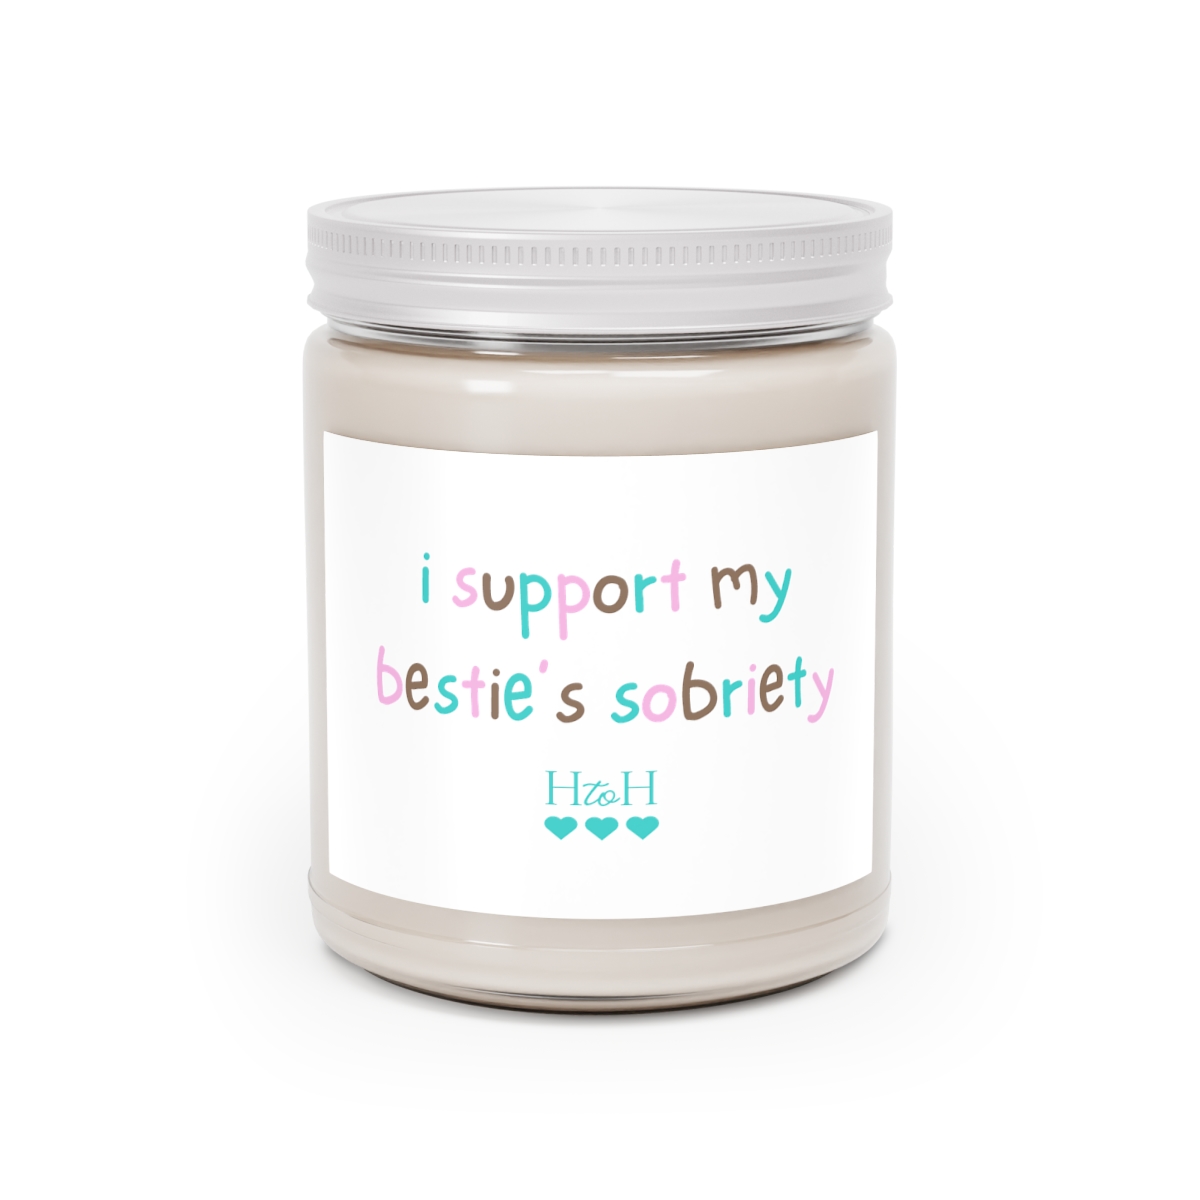 Bestie's Sobriety - Scented Candles, 9oz product thumbnail image